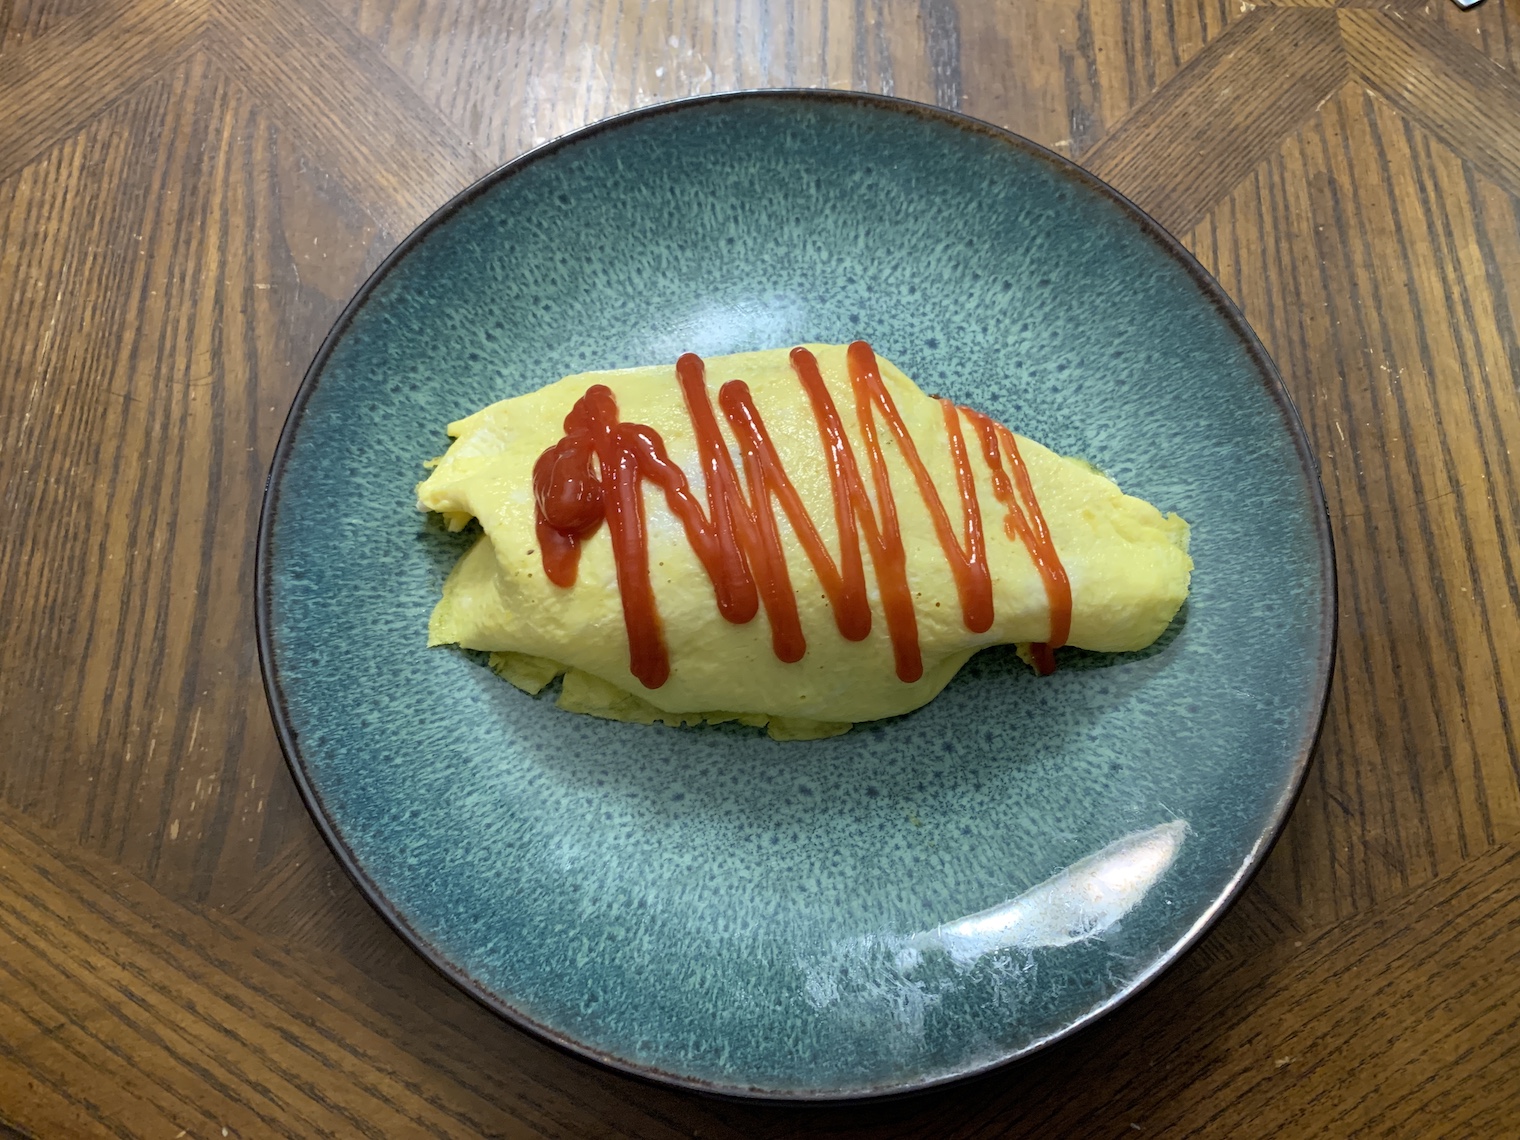 Omrice. tomato ketchup based fried rice wrapped with egg